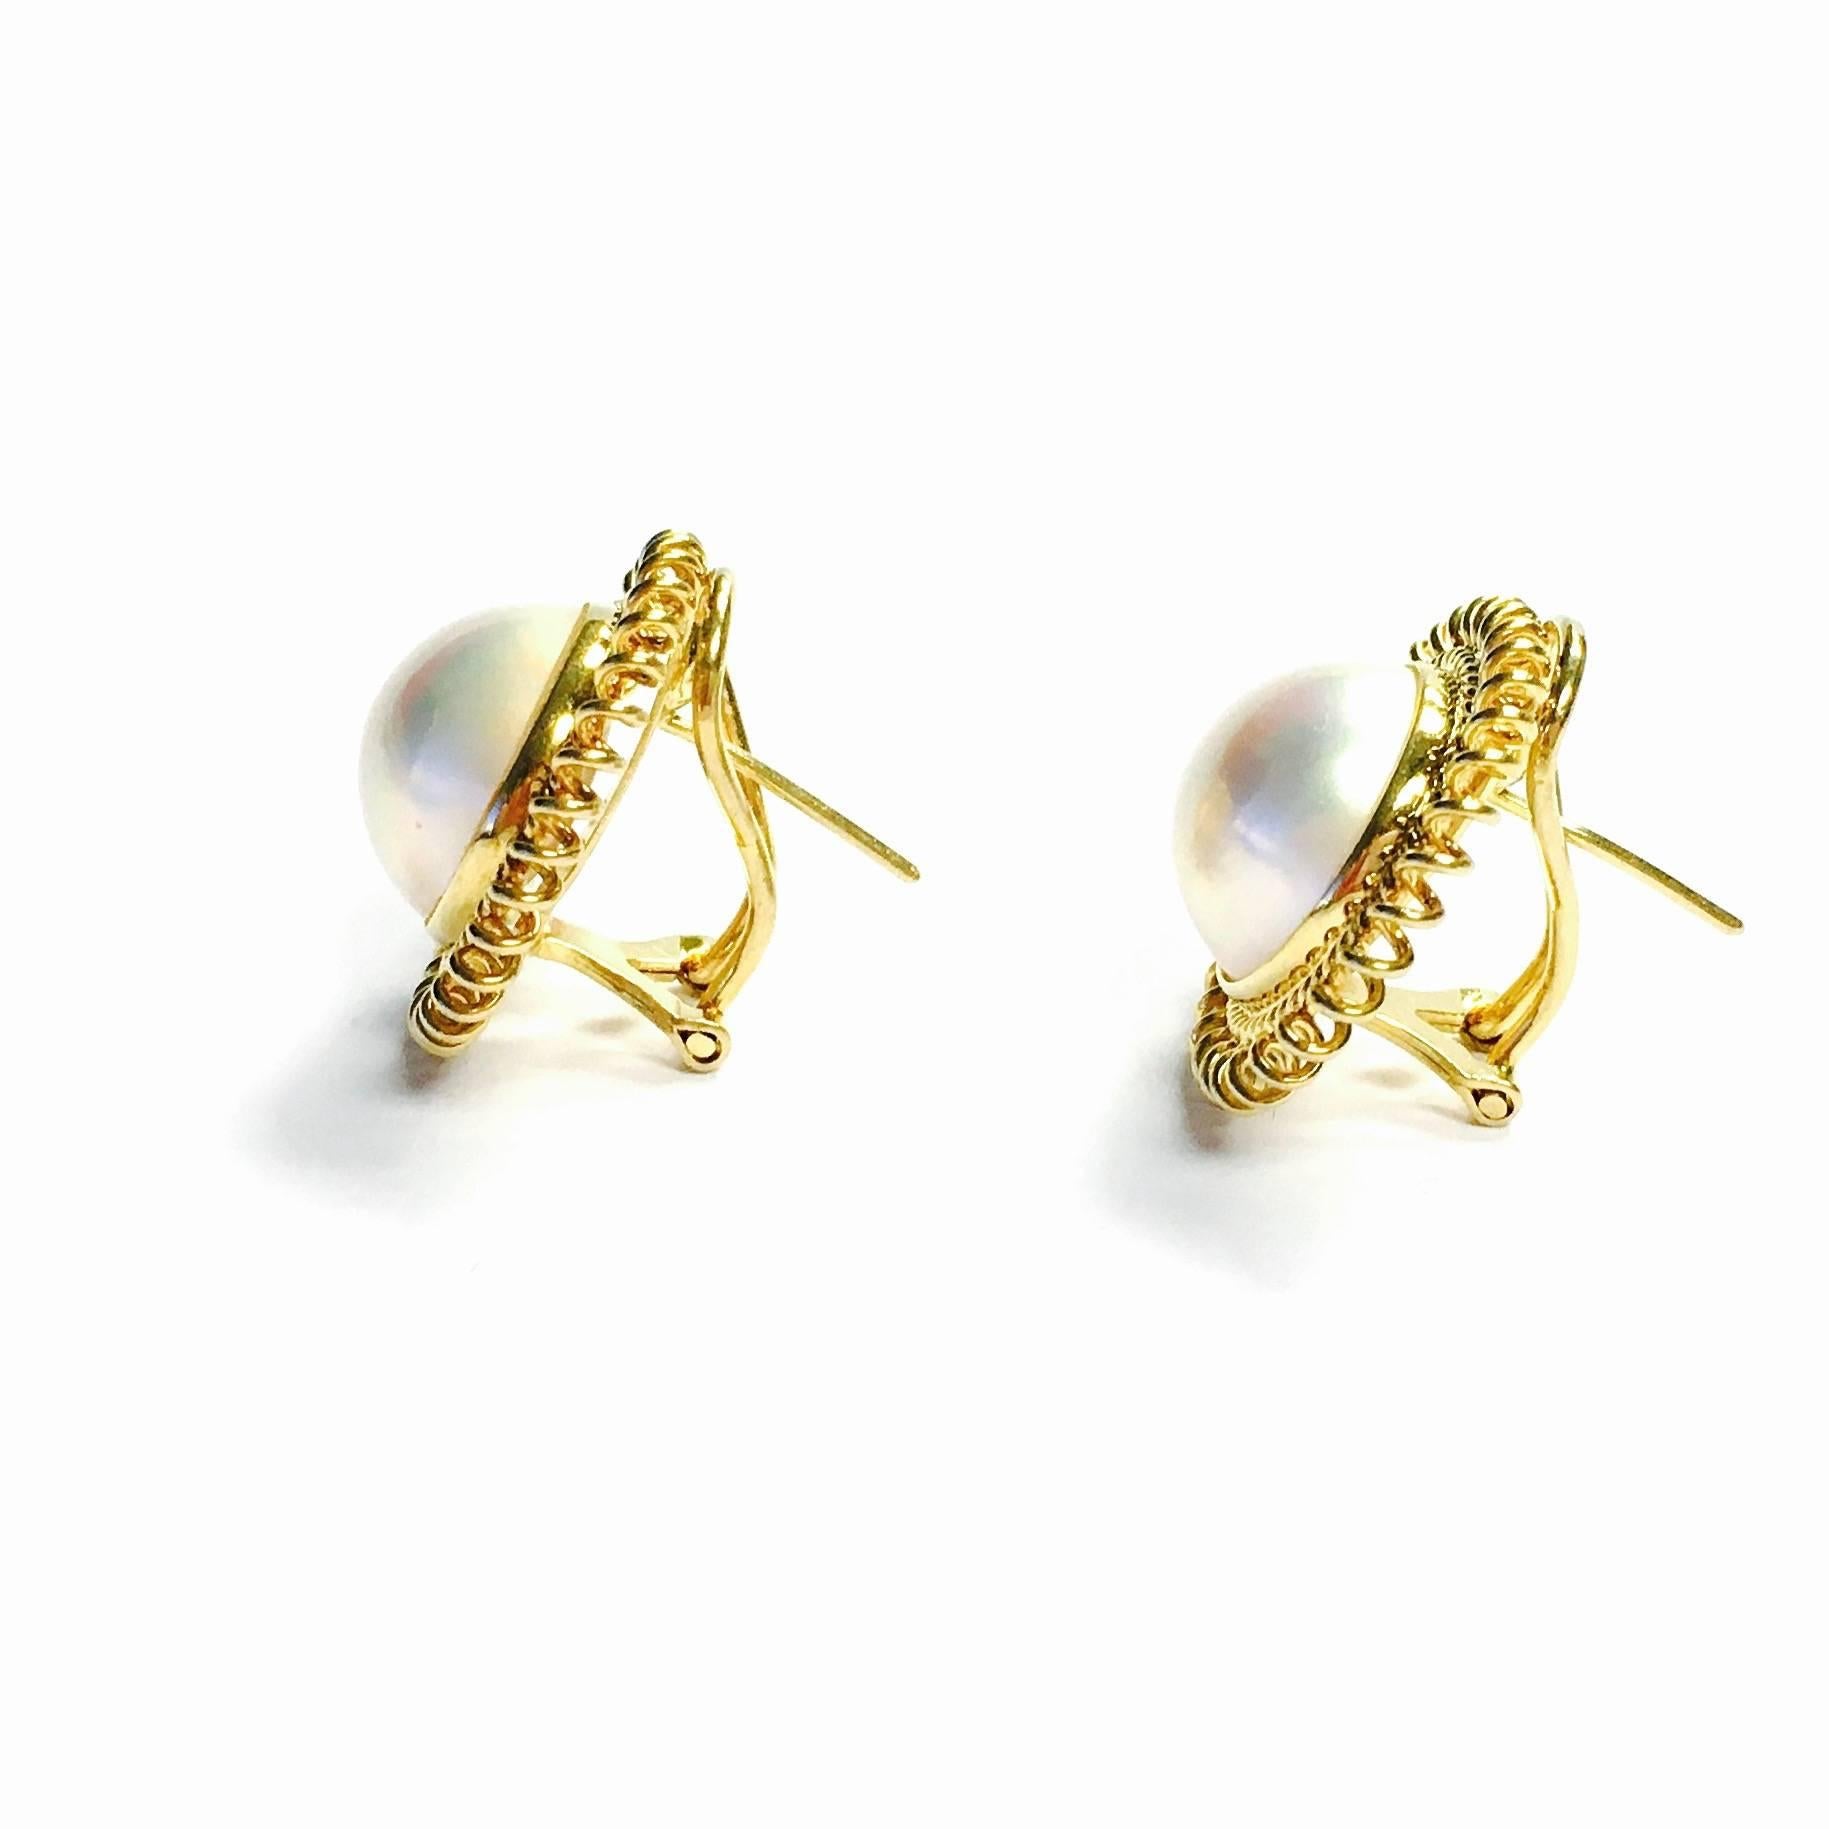 Each earring features a 13 mm white cultured South Sea pearl with a pink over-tone and high luster, set within an 18K yellow gold sunburst style bezel. Post and omega backs. Each earring measures 22 mm in diameter. 
Weight: 12.1 grams